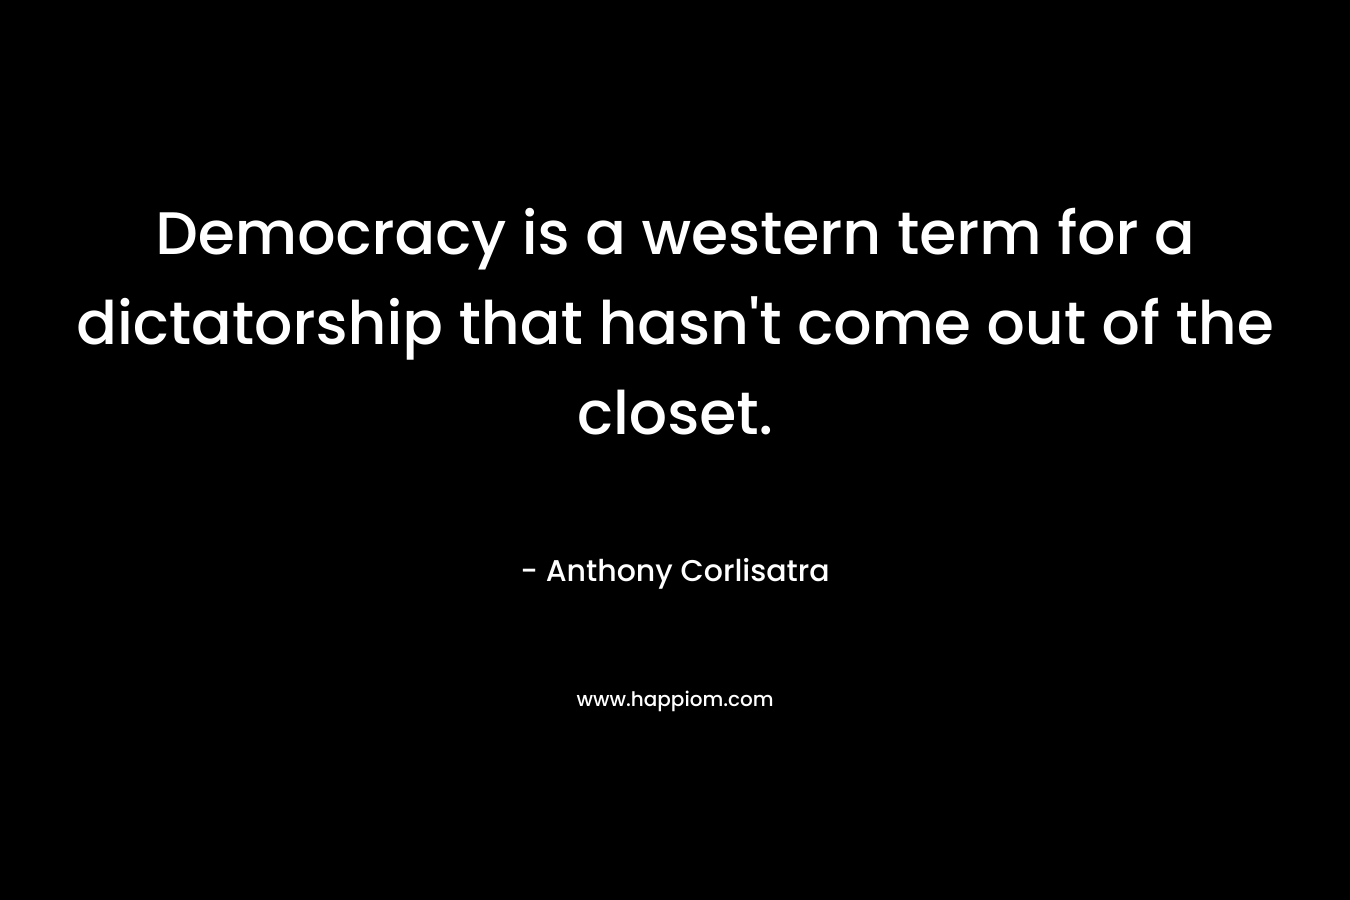 Democracy is a western term for a dictatorship that hasn't come out of the closet.